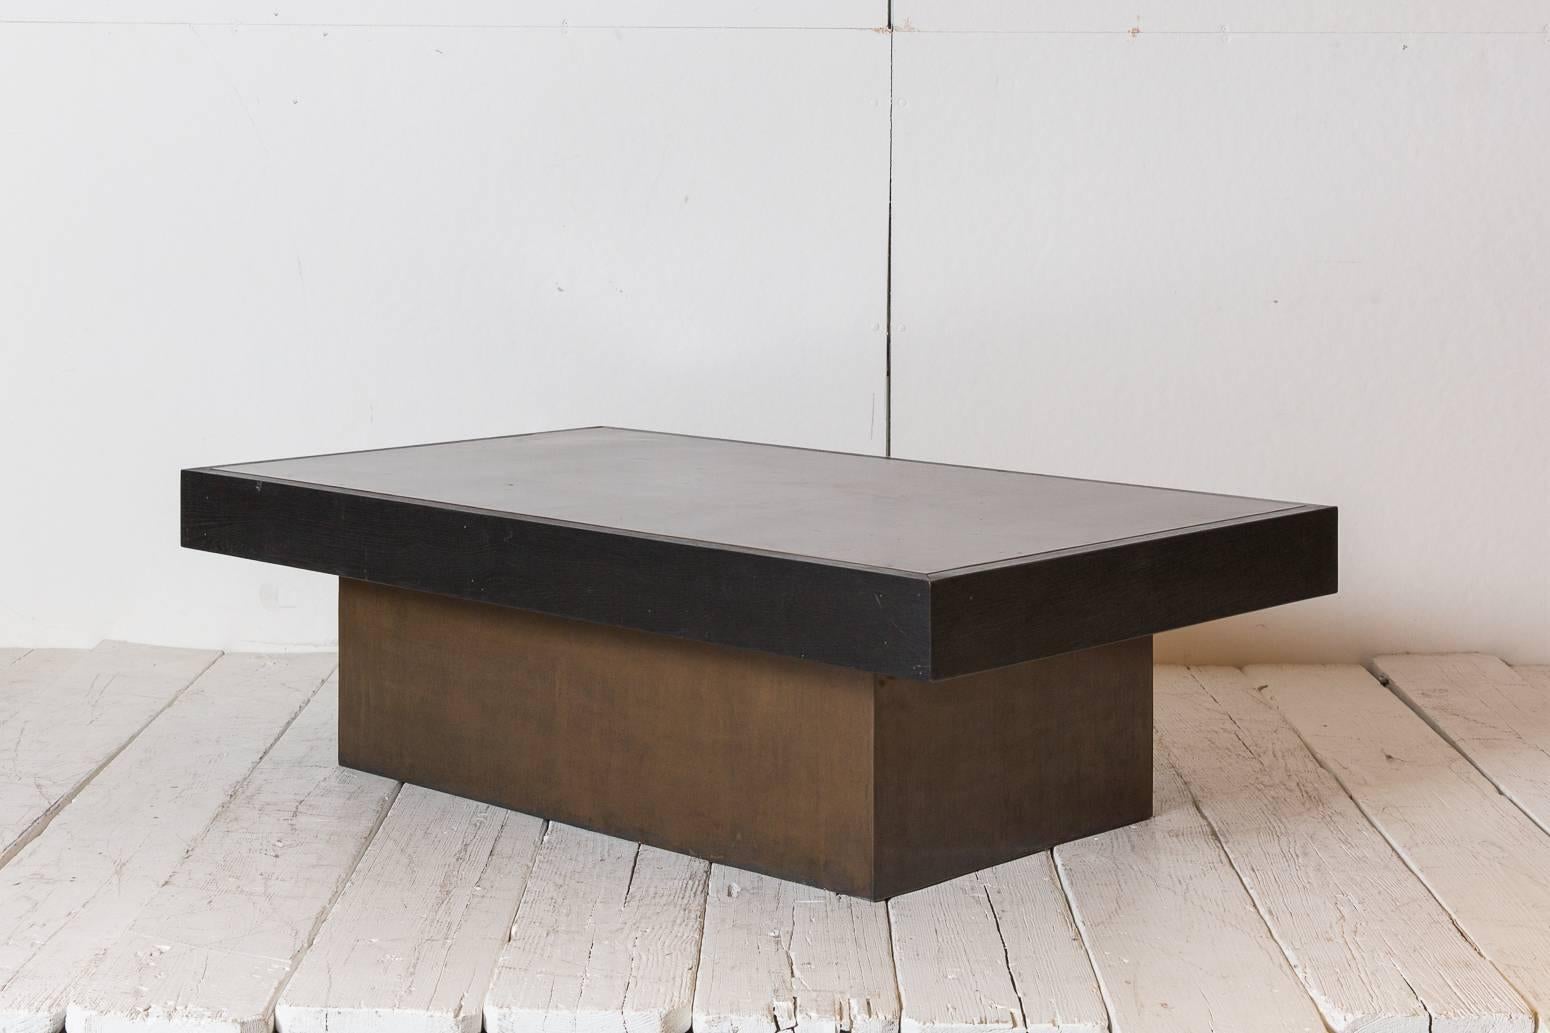 Black rectangular blocked coffee table with copper inlay.